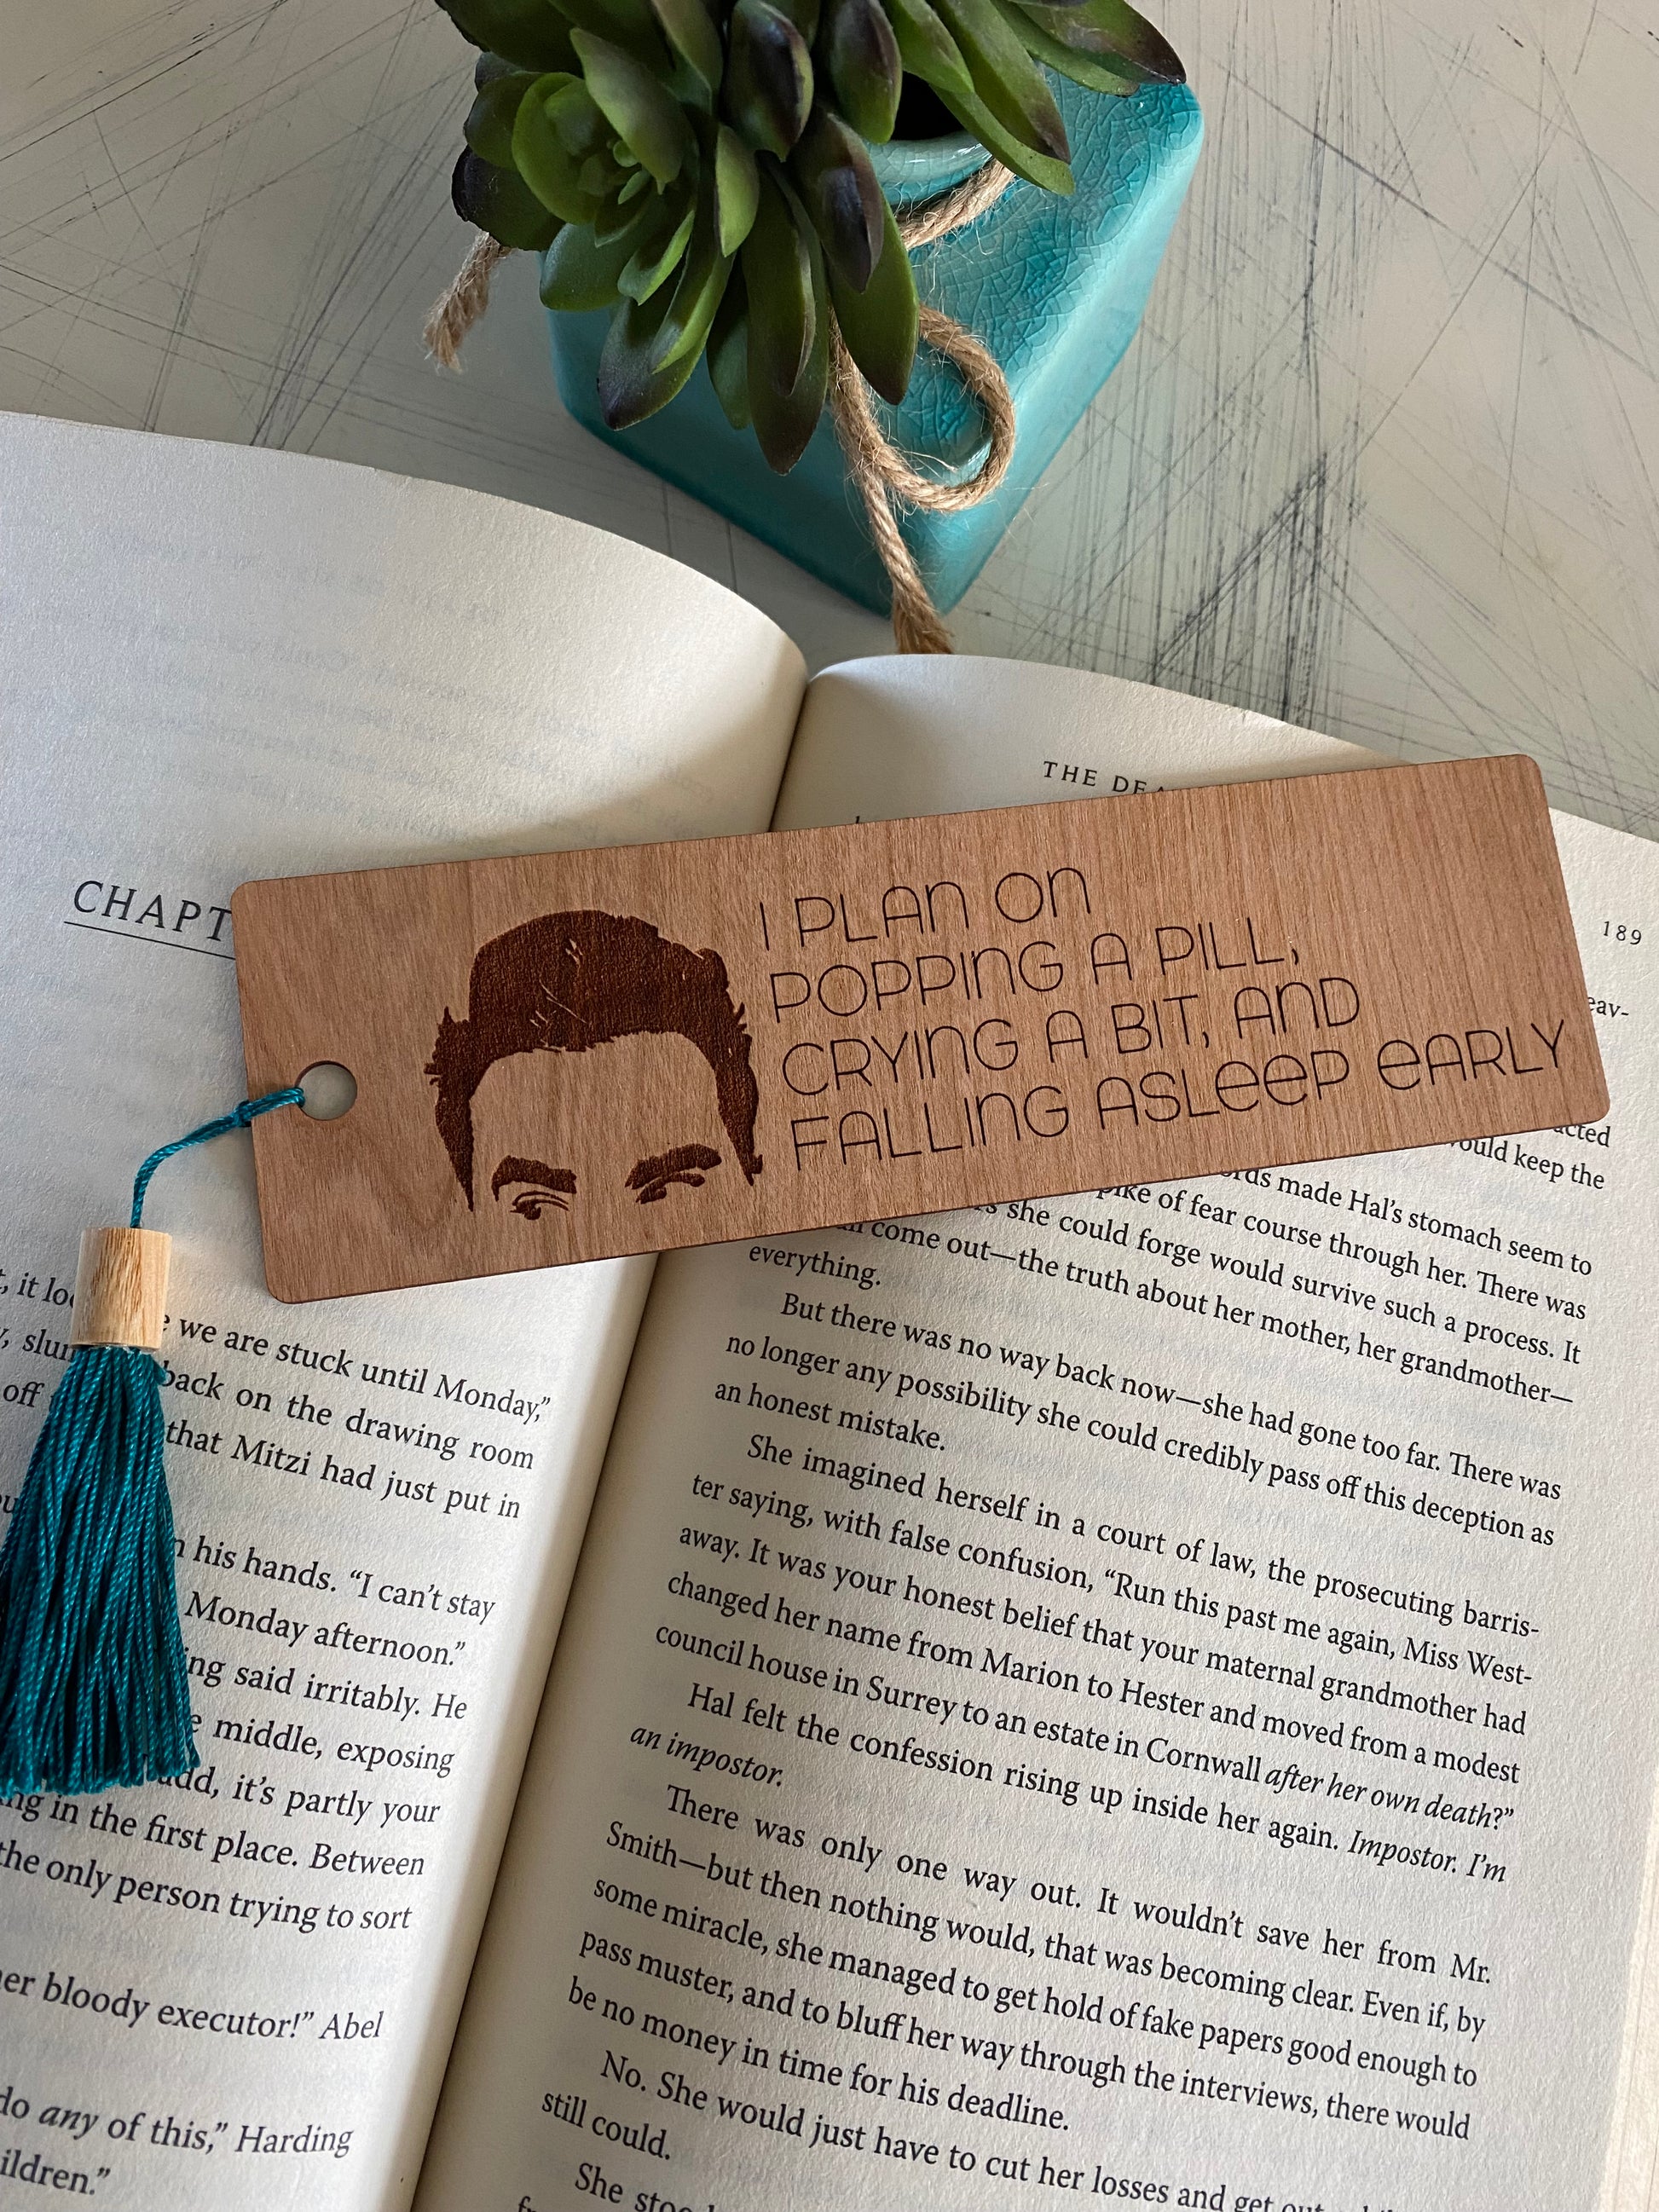 I plan on popping a pill, crying a bit, and falling asleep early. - engraved wood bookmark